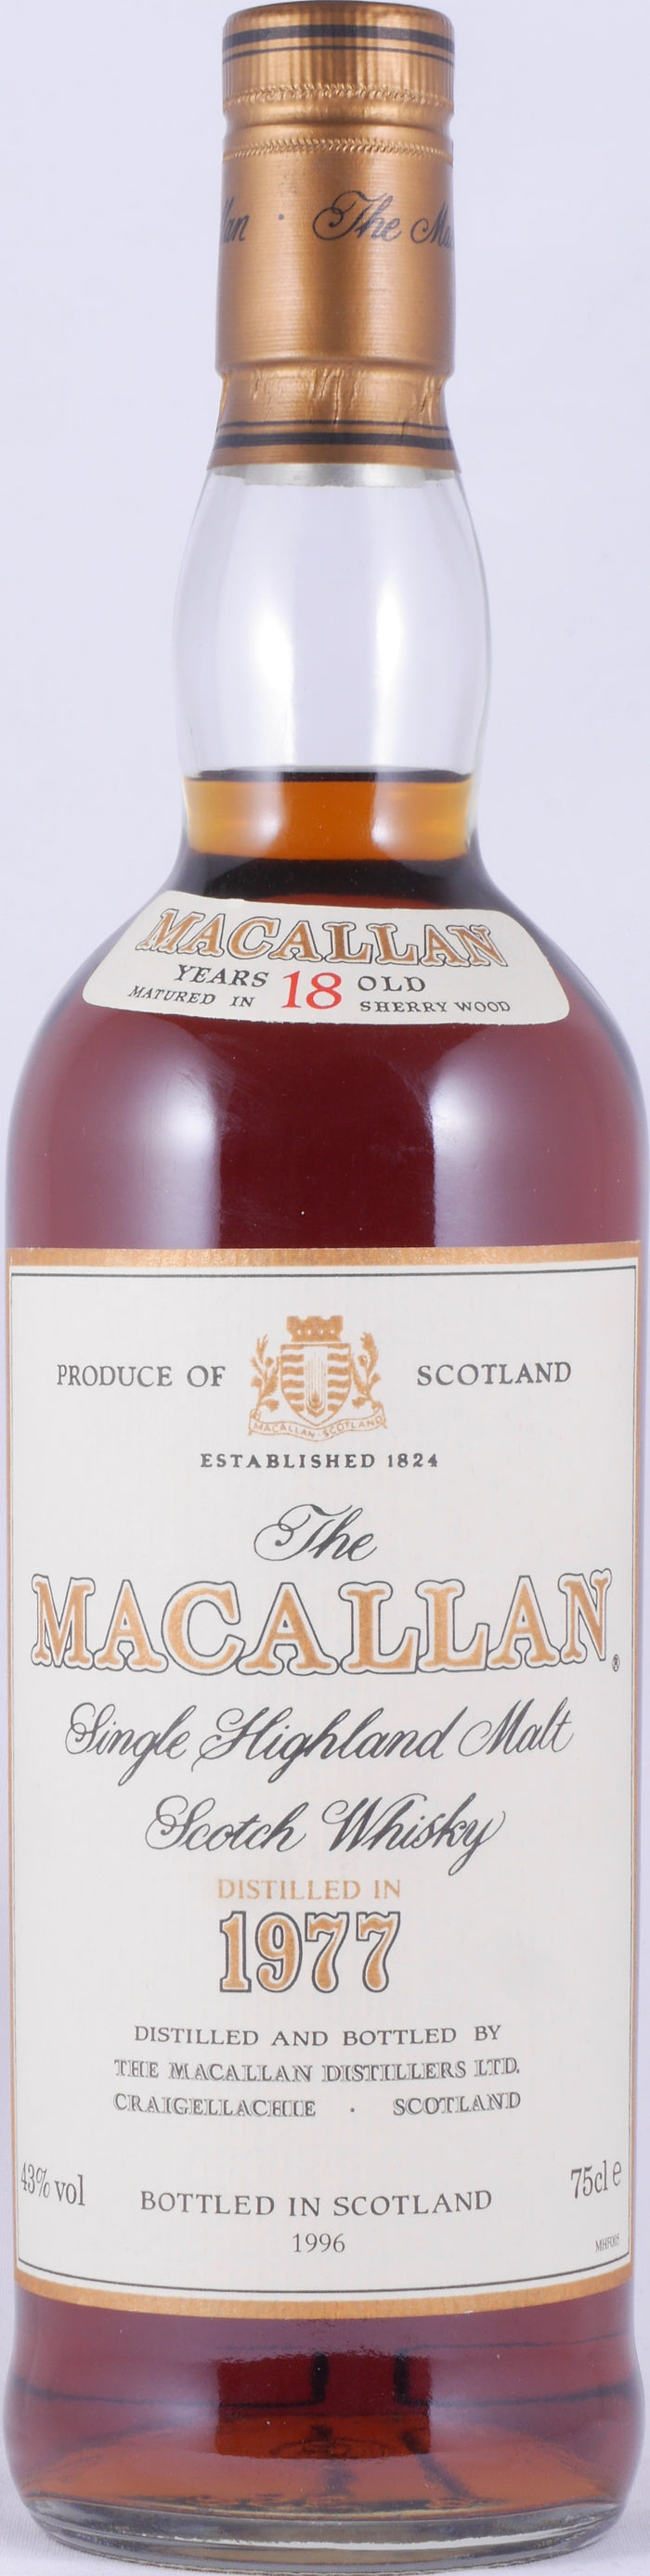 Macallan 18 Year Old (D.1977, B.1996) Sherry Wood Scotch Whisky